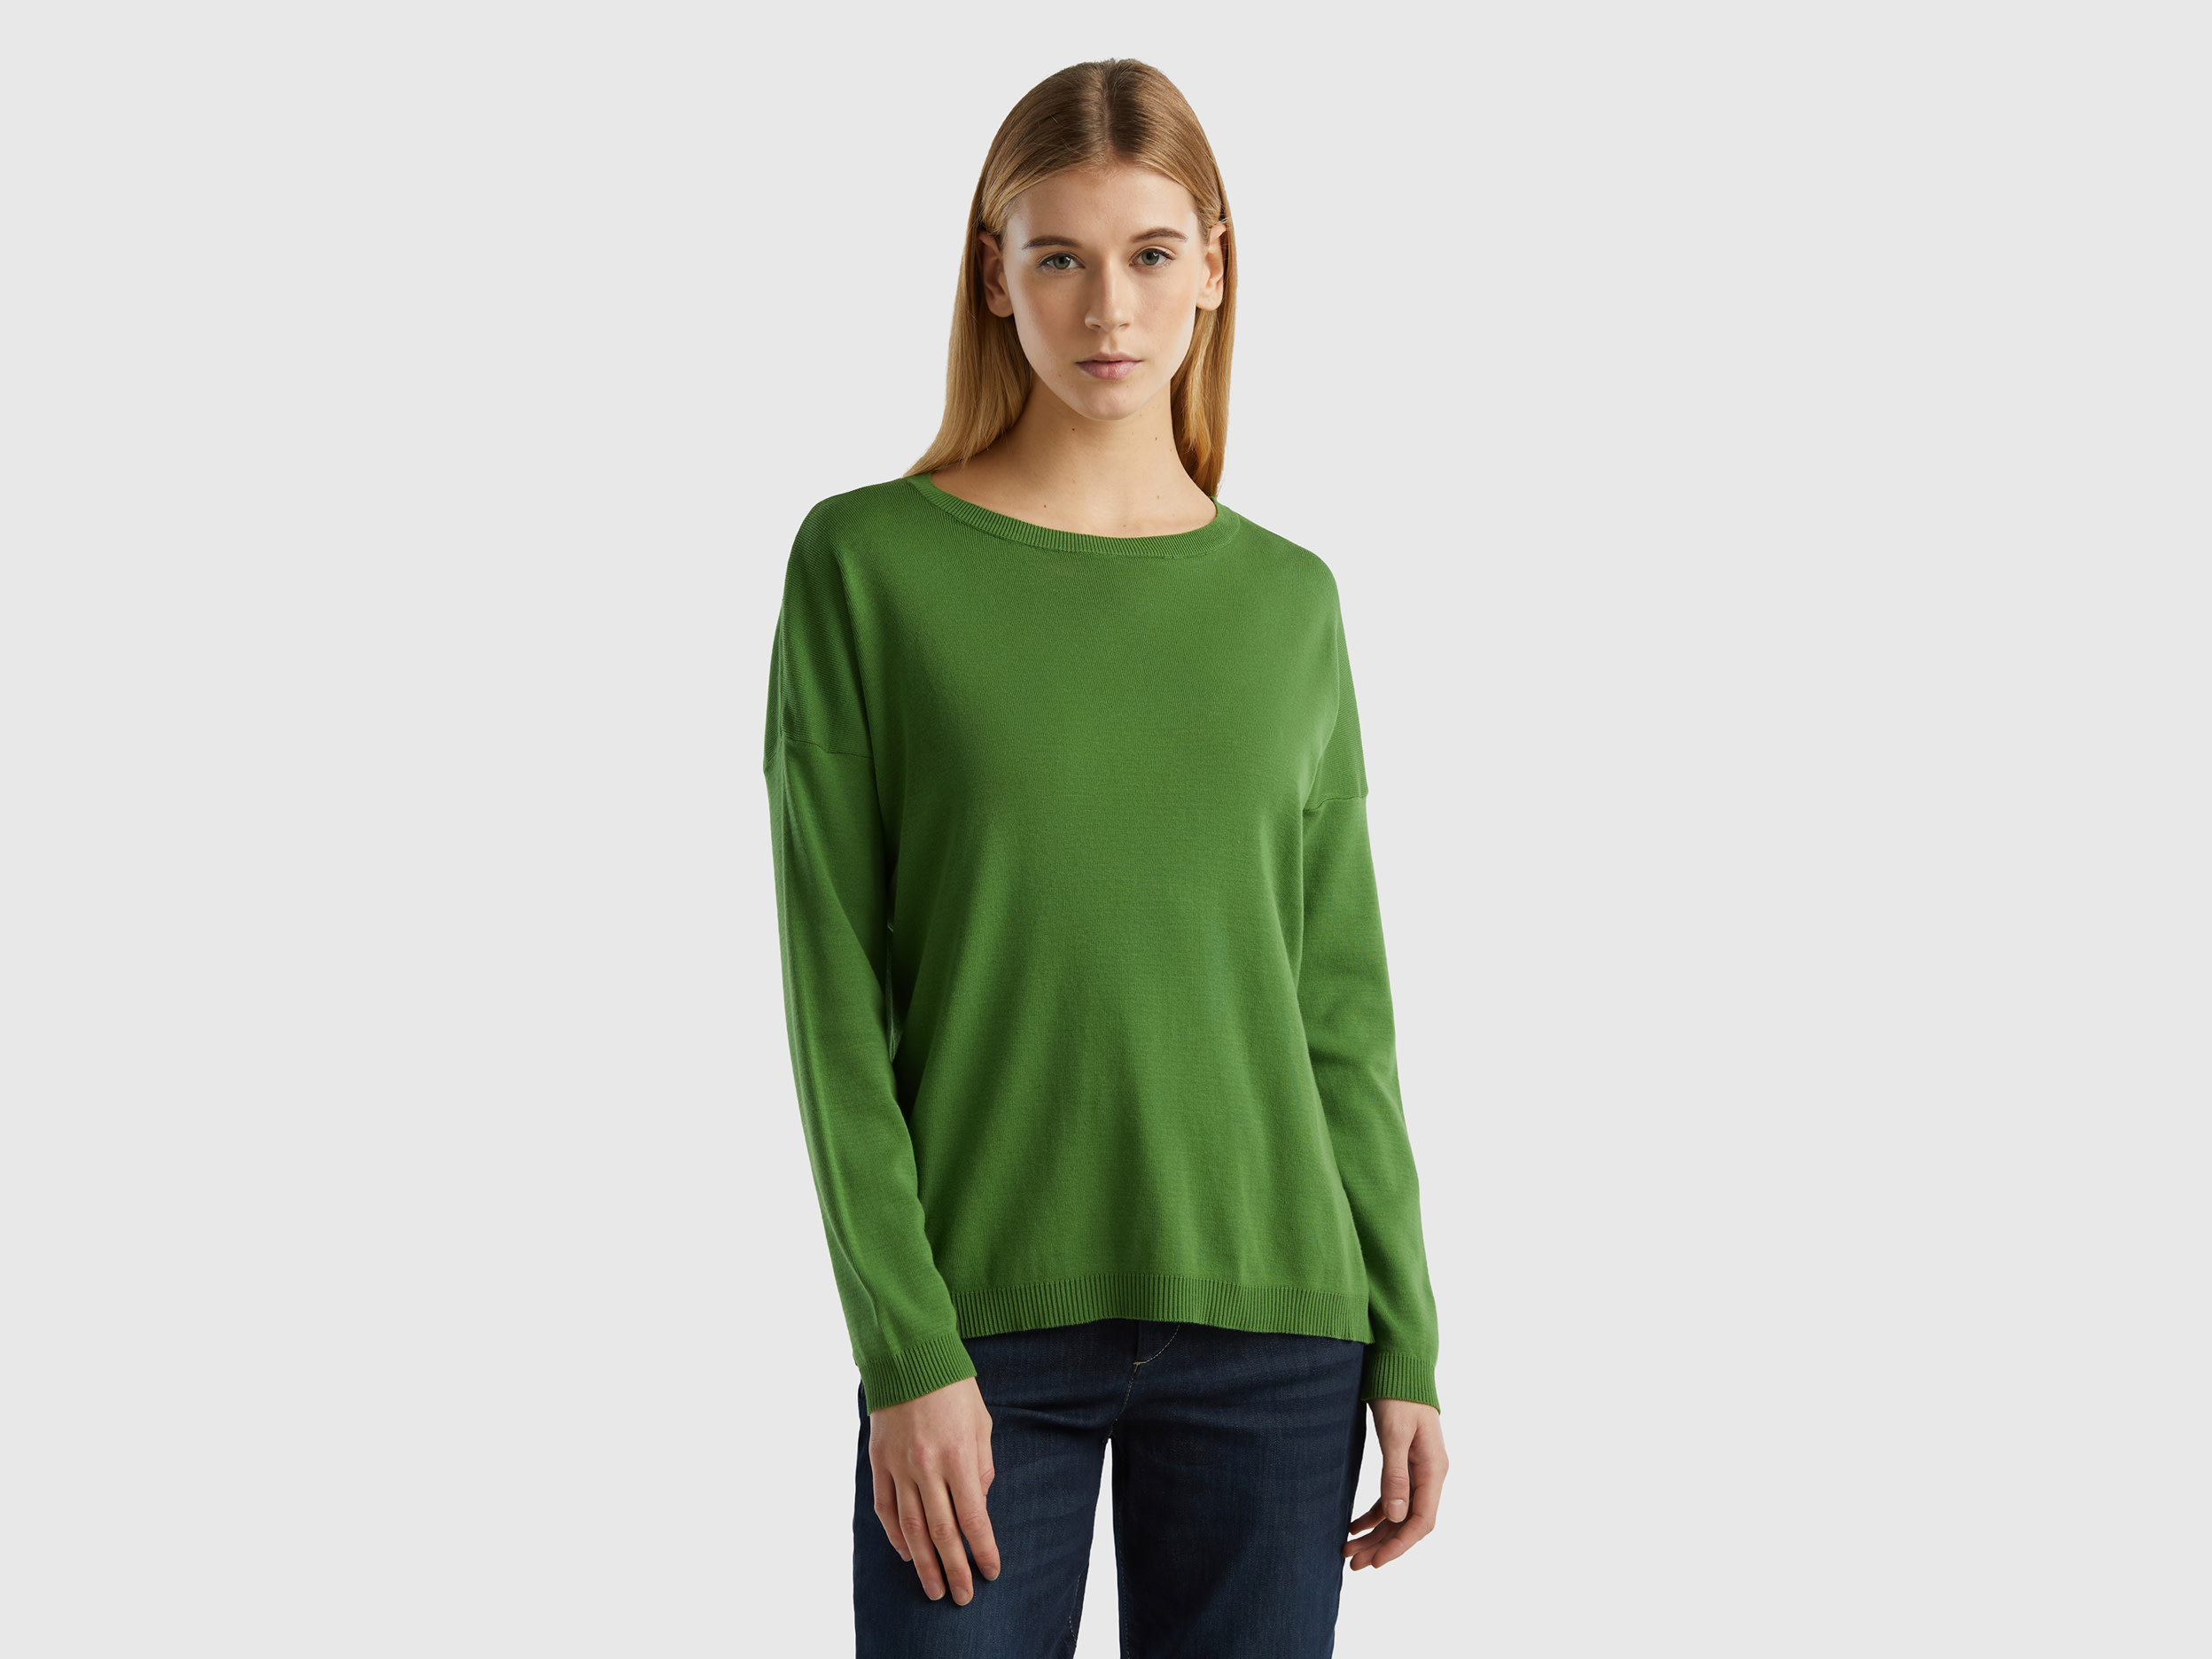 Benetton, Cotton Sweater With Round Neck, size S, Military Green, Women